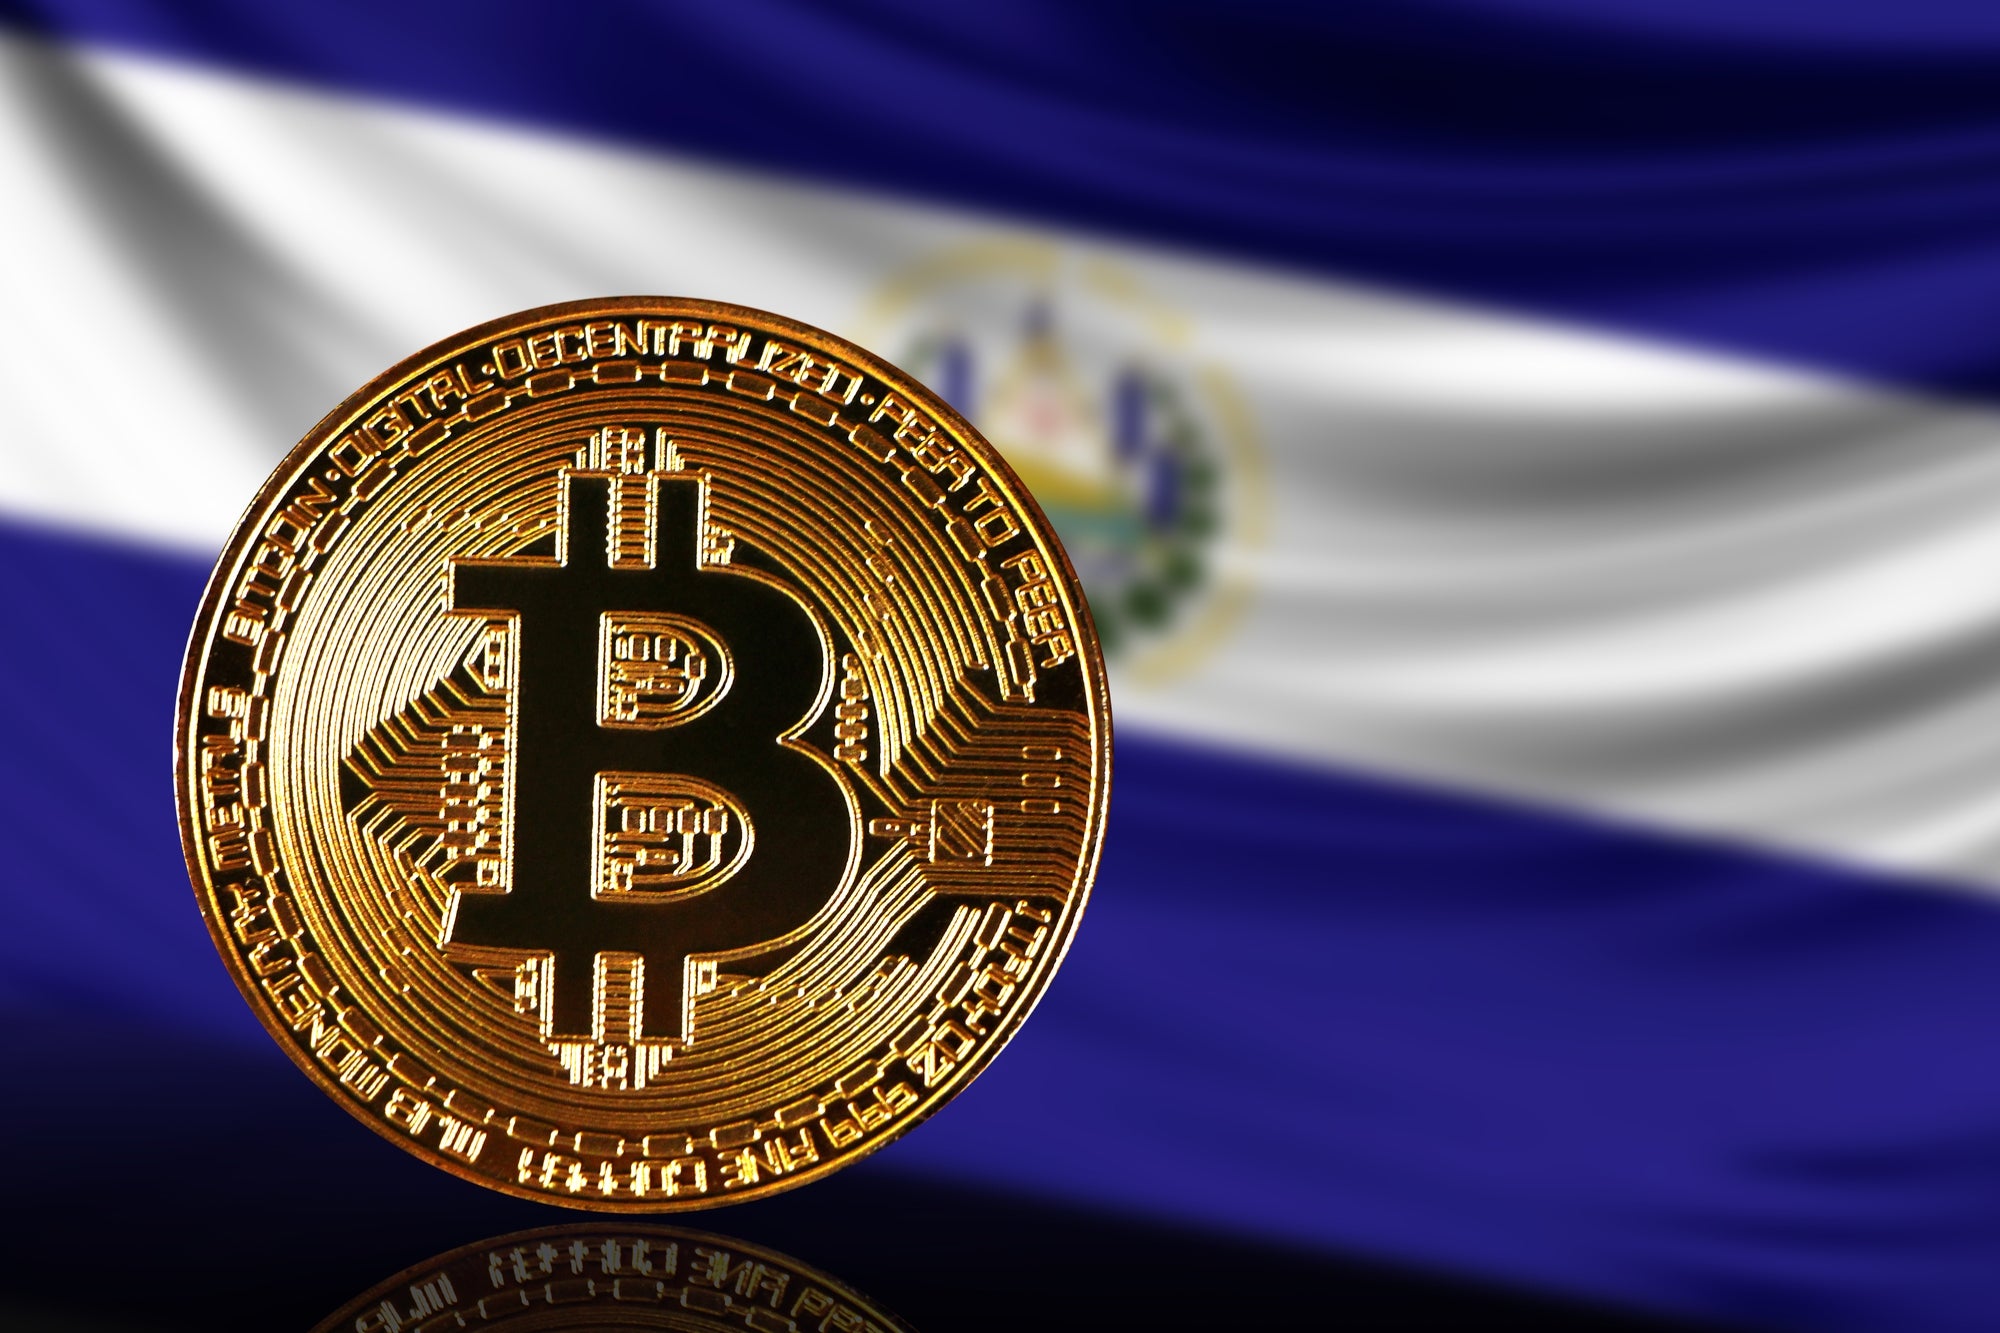 El Salvador’s Bitcoin Bill Is Now Two Years Old, How Has The Country Fared Since Then? | Bitcoinist.com